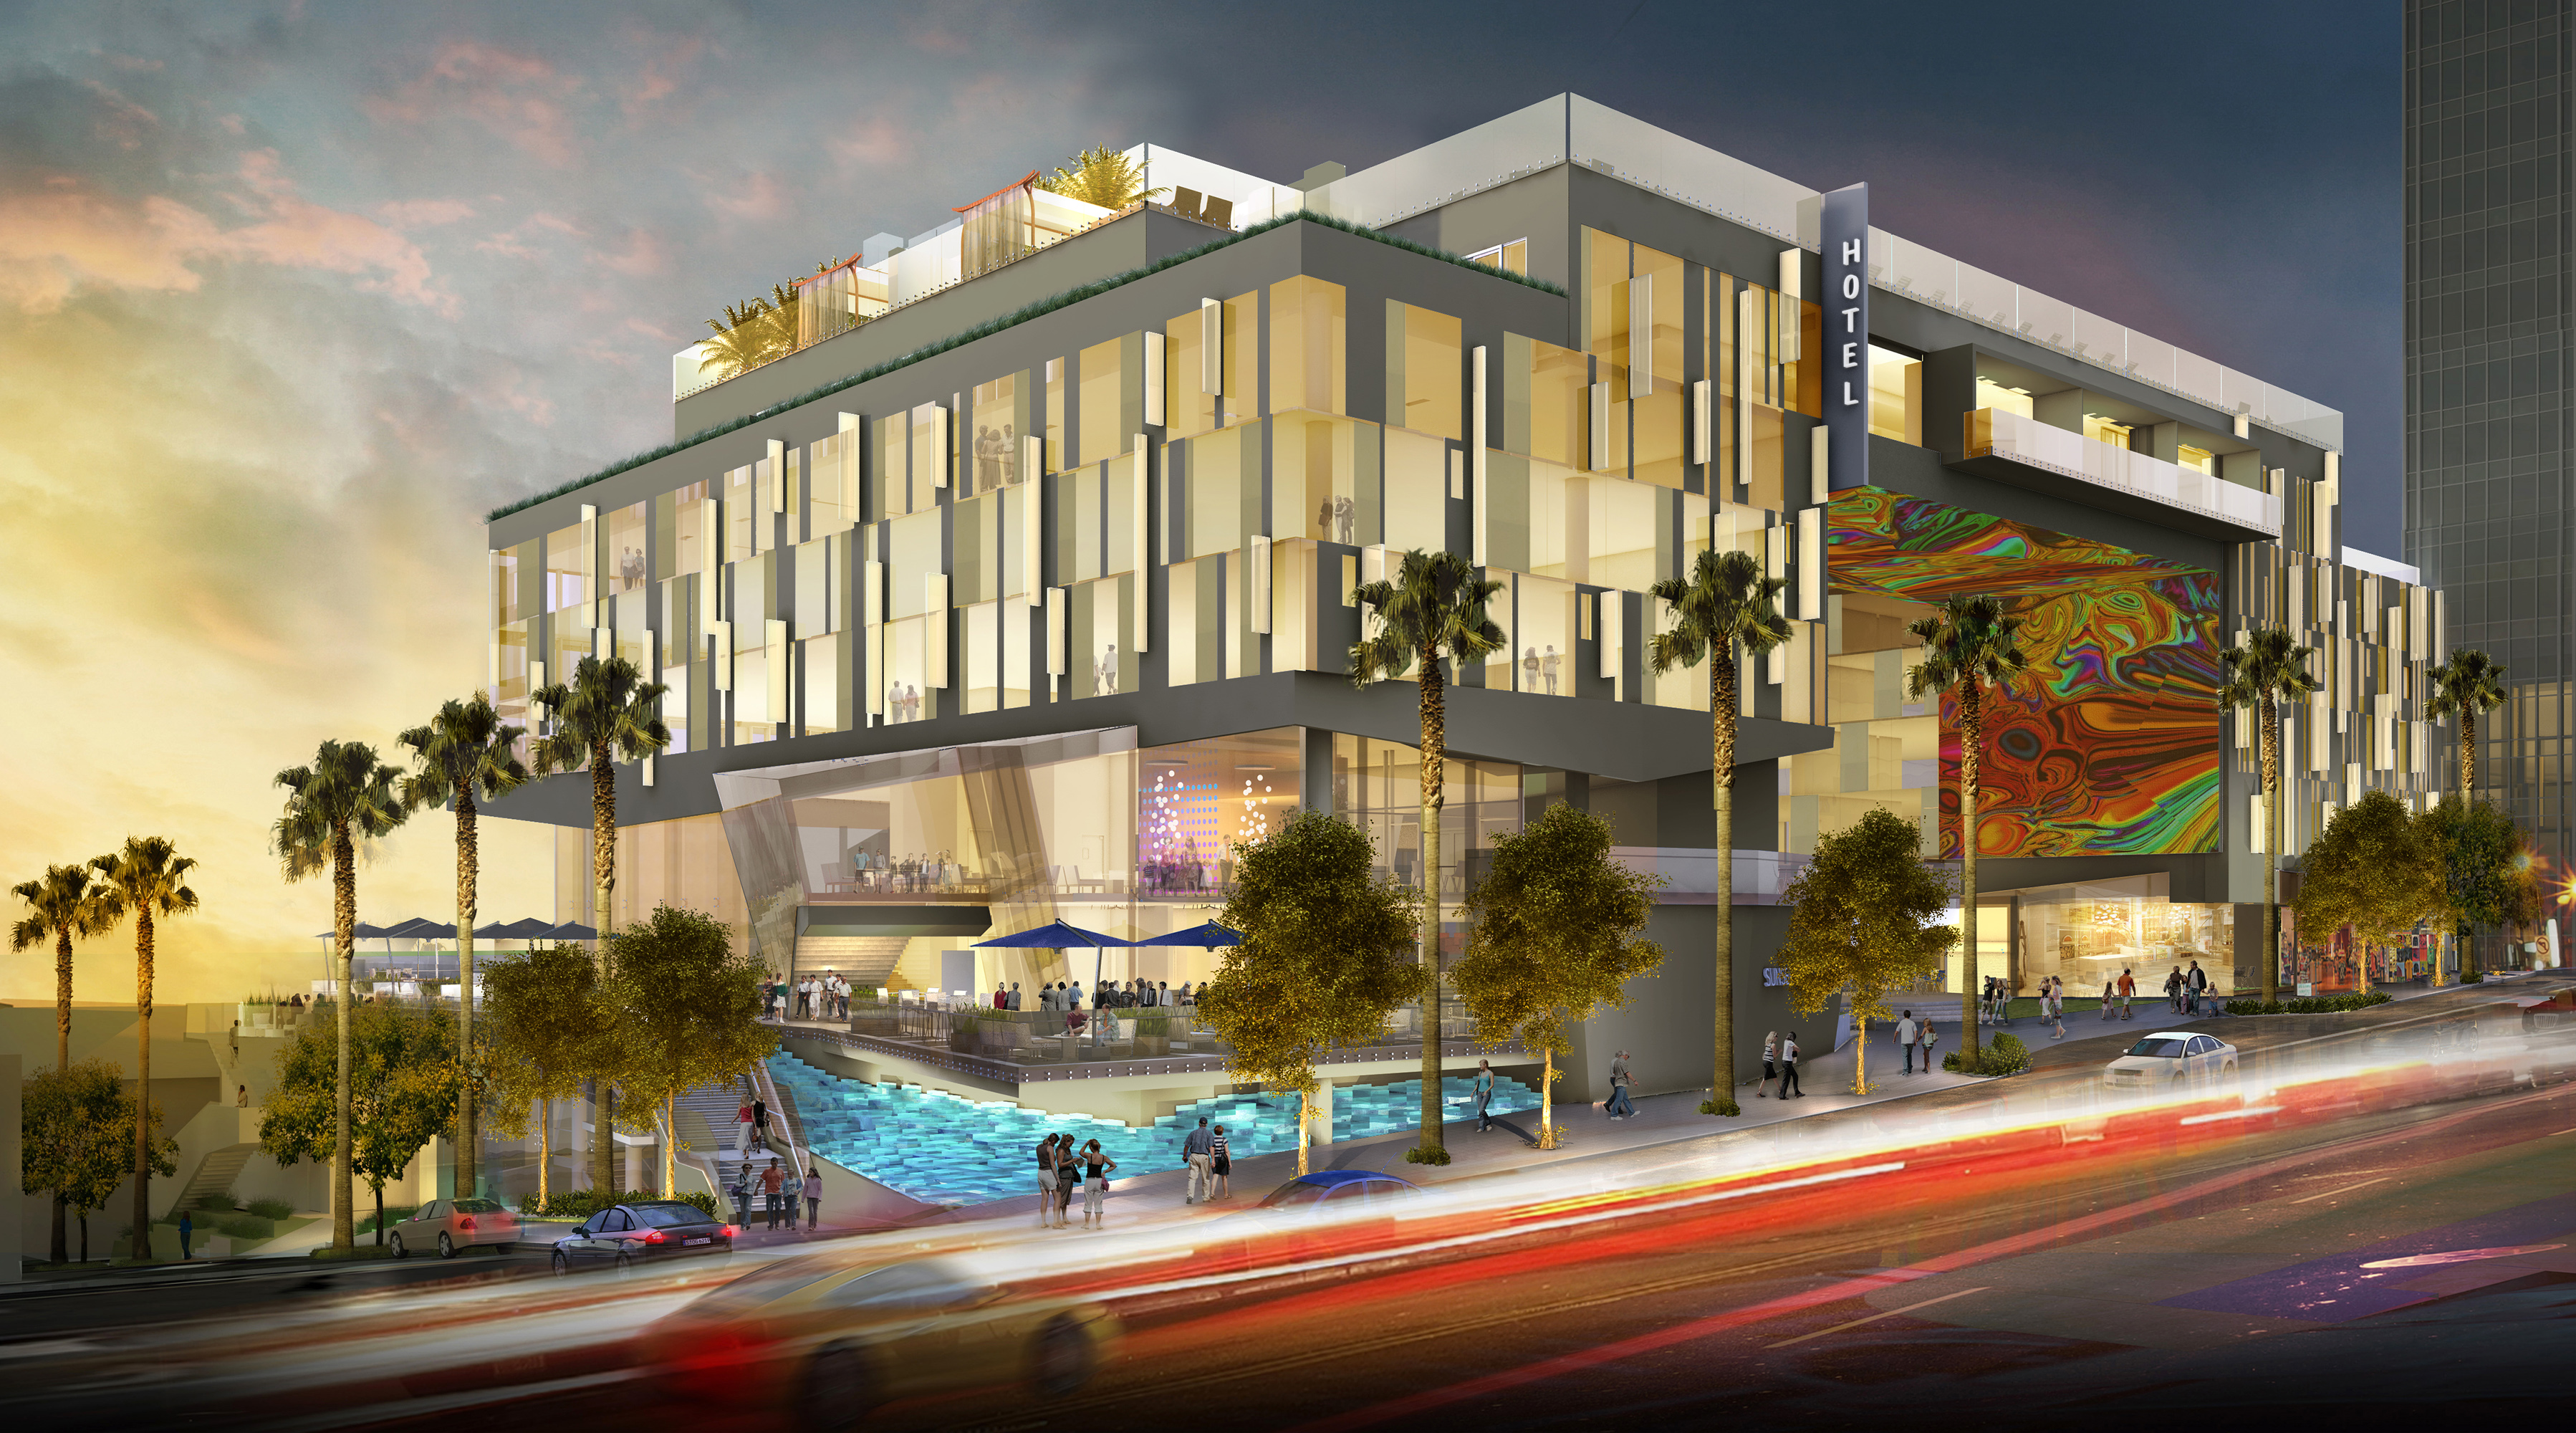 Proposed luxury hotel design by three, Sunset Boulevard, West Hollywood, California